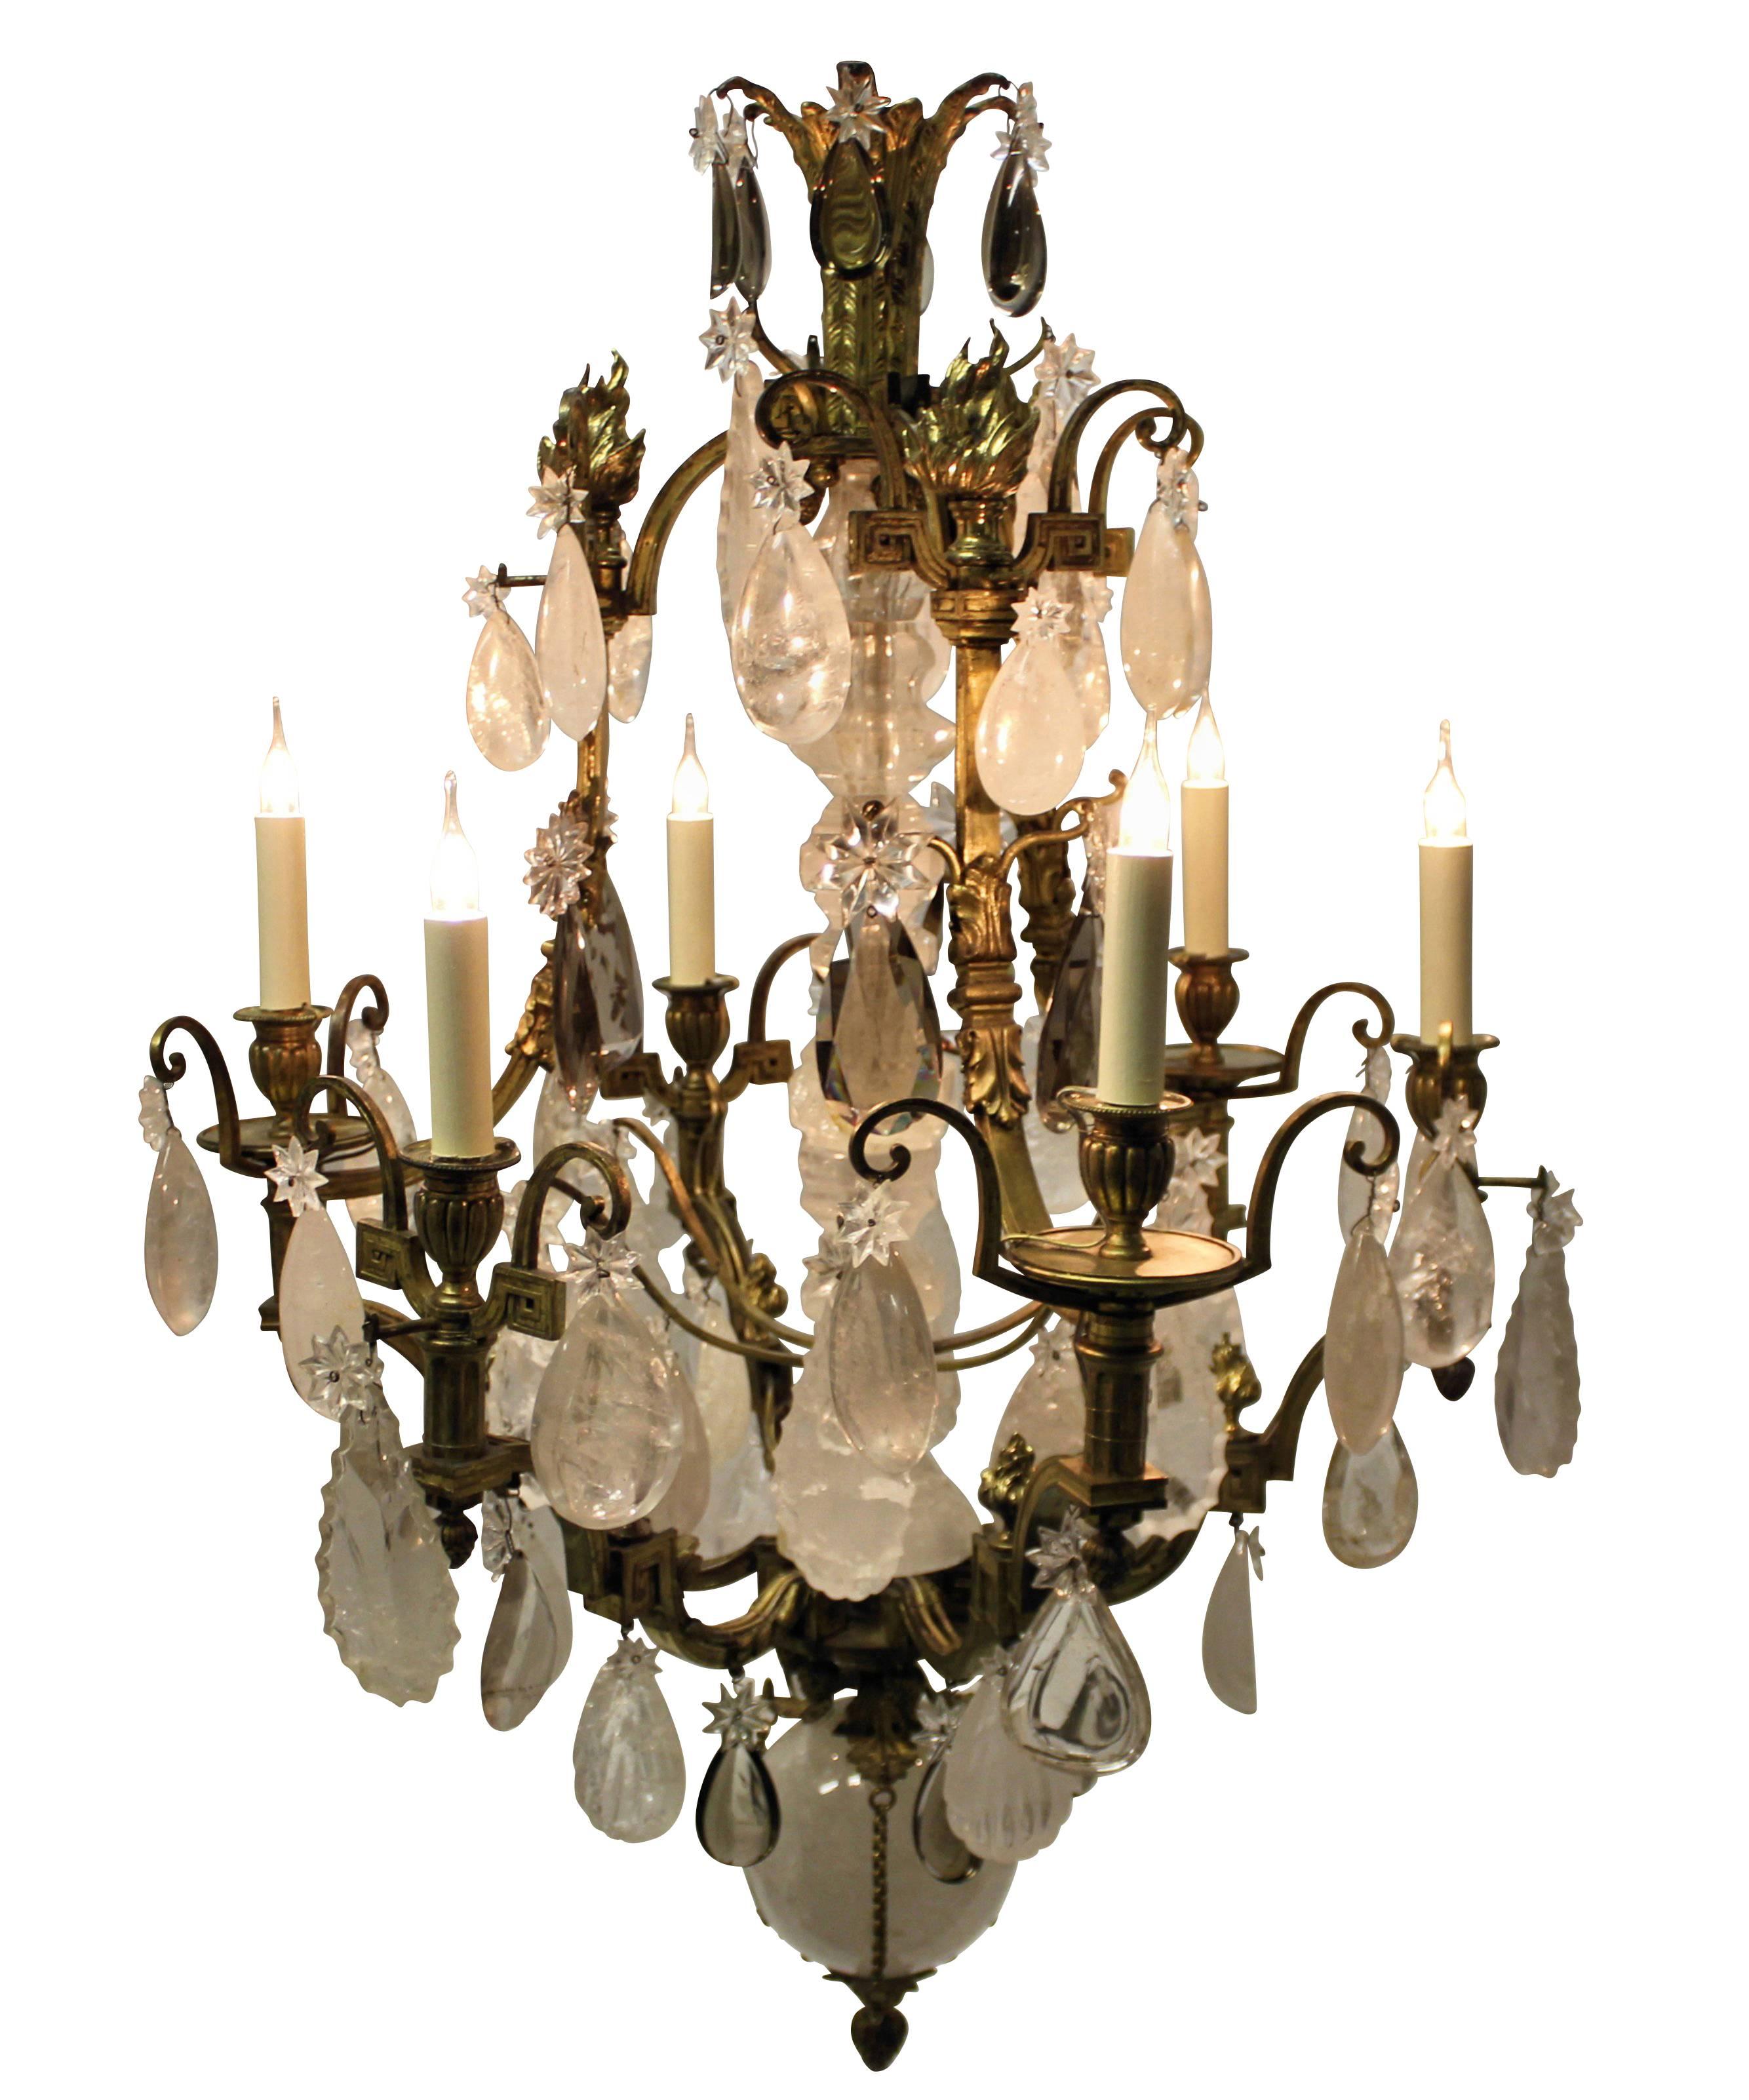 A fine Russian neoclassical gilt bronze and rock crystal chandelier with smoked quartz drops. Made in France for the Russian market.

The ball has a diameter of 18cm and the largest plaque is 18cm.